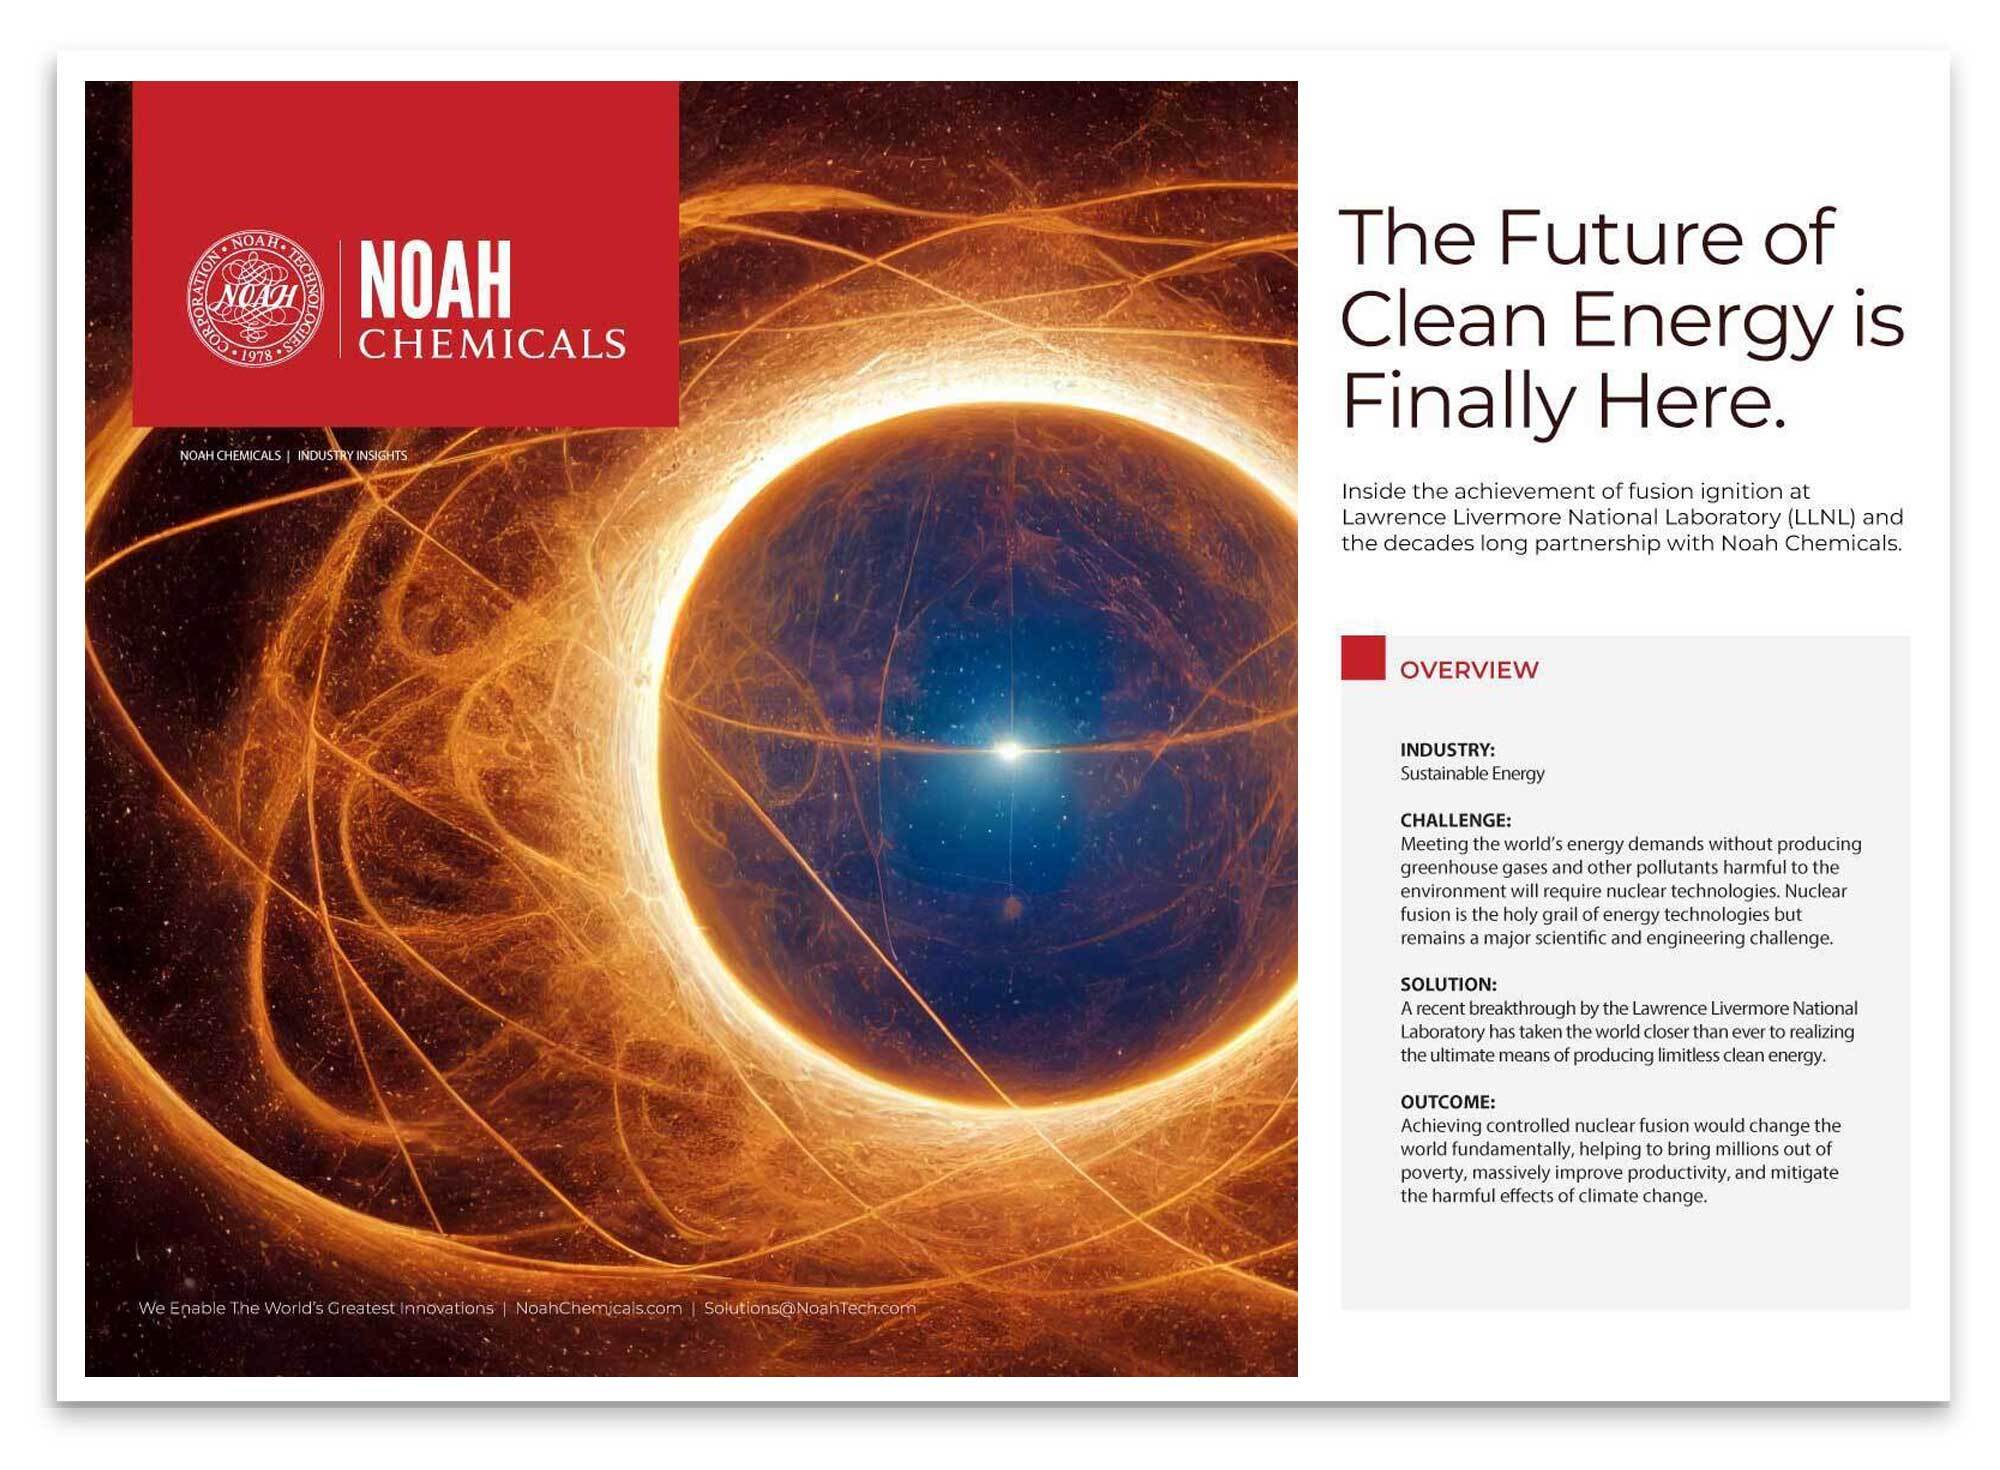 Energy orb representing Fusion ignition for the LLNL Fusion achievement paper cover